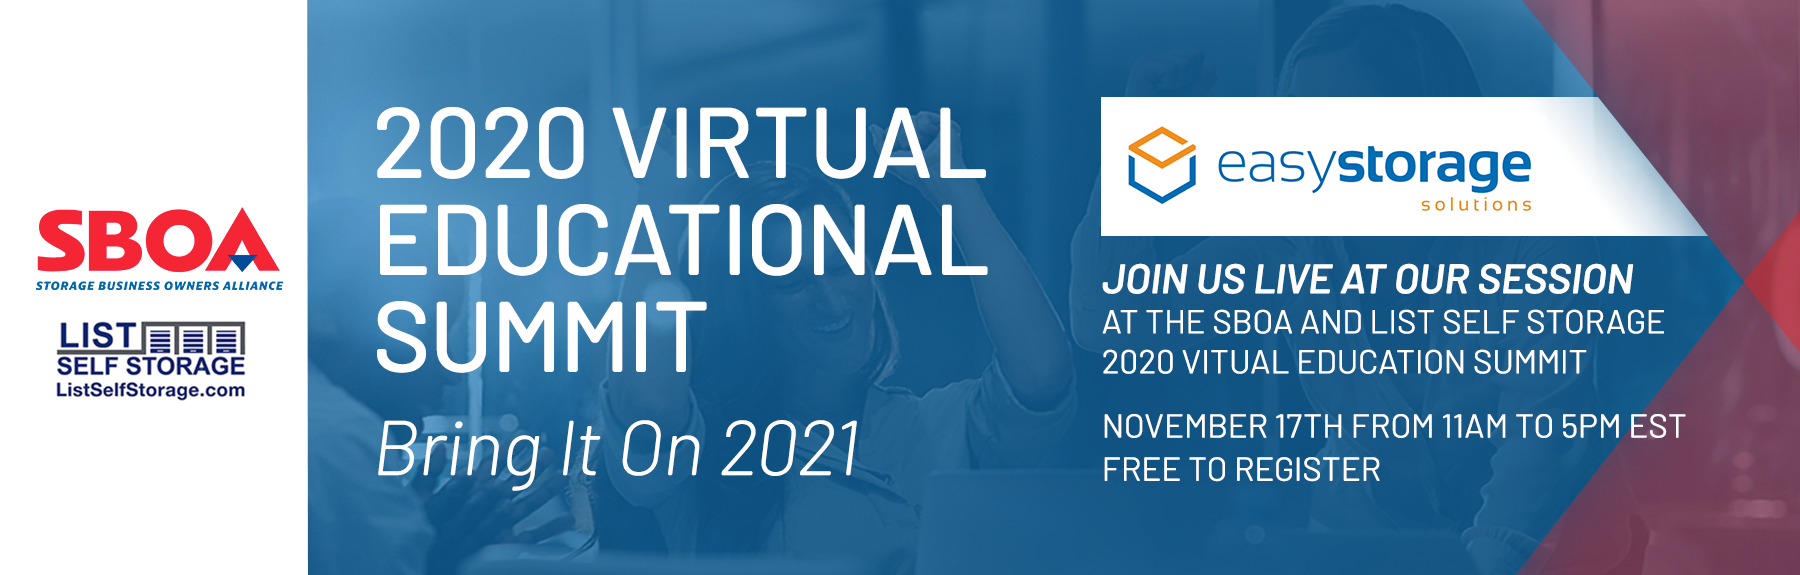 Join Us at 2020 Virtual Education Summit Bring It On 2021